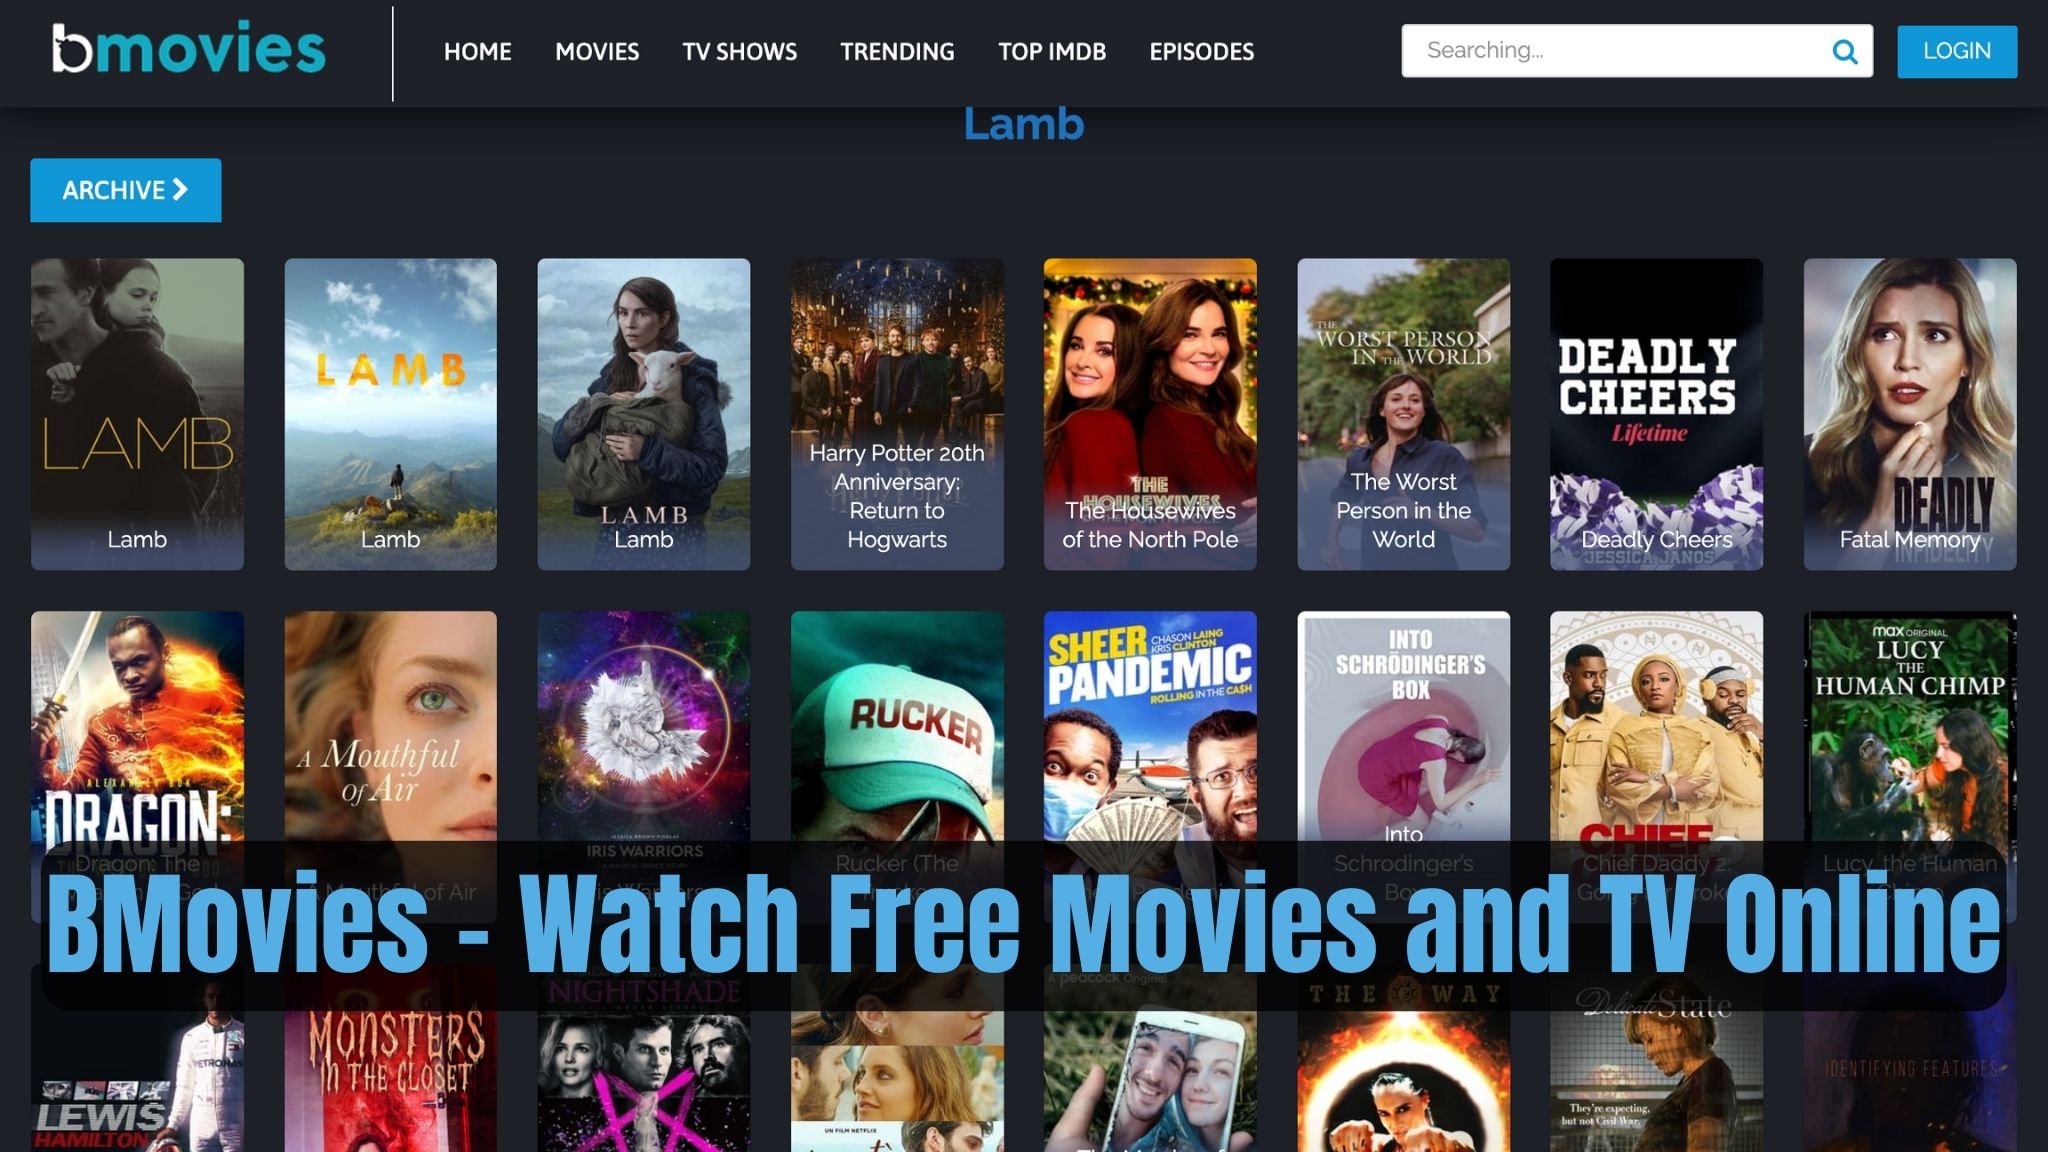 BMovies - Watch Free Movies and TV Online